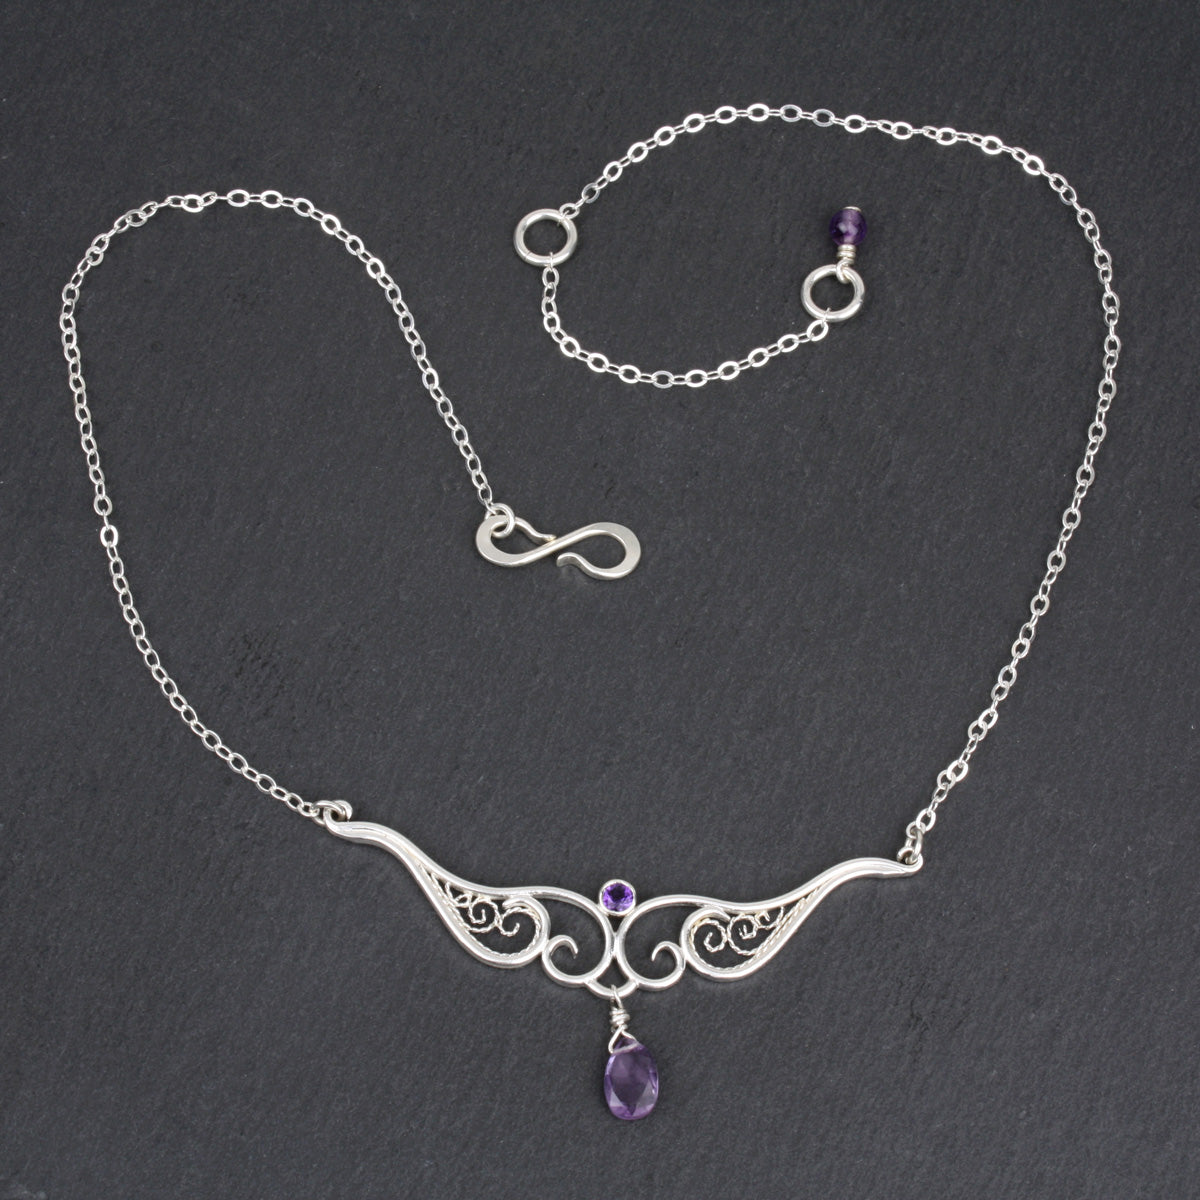 A graceful silver necklace with delicate filigree wirework, accented with purple amethyst, on a slate stone background.